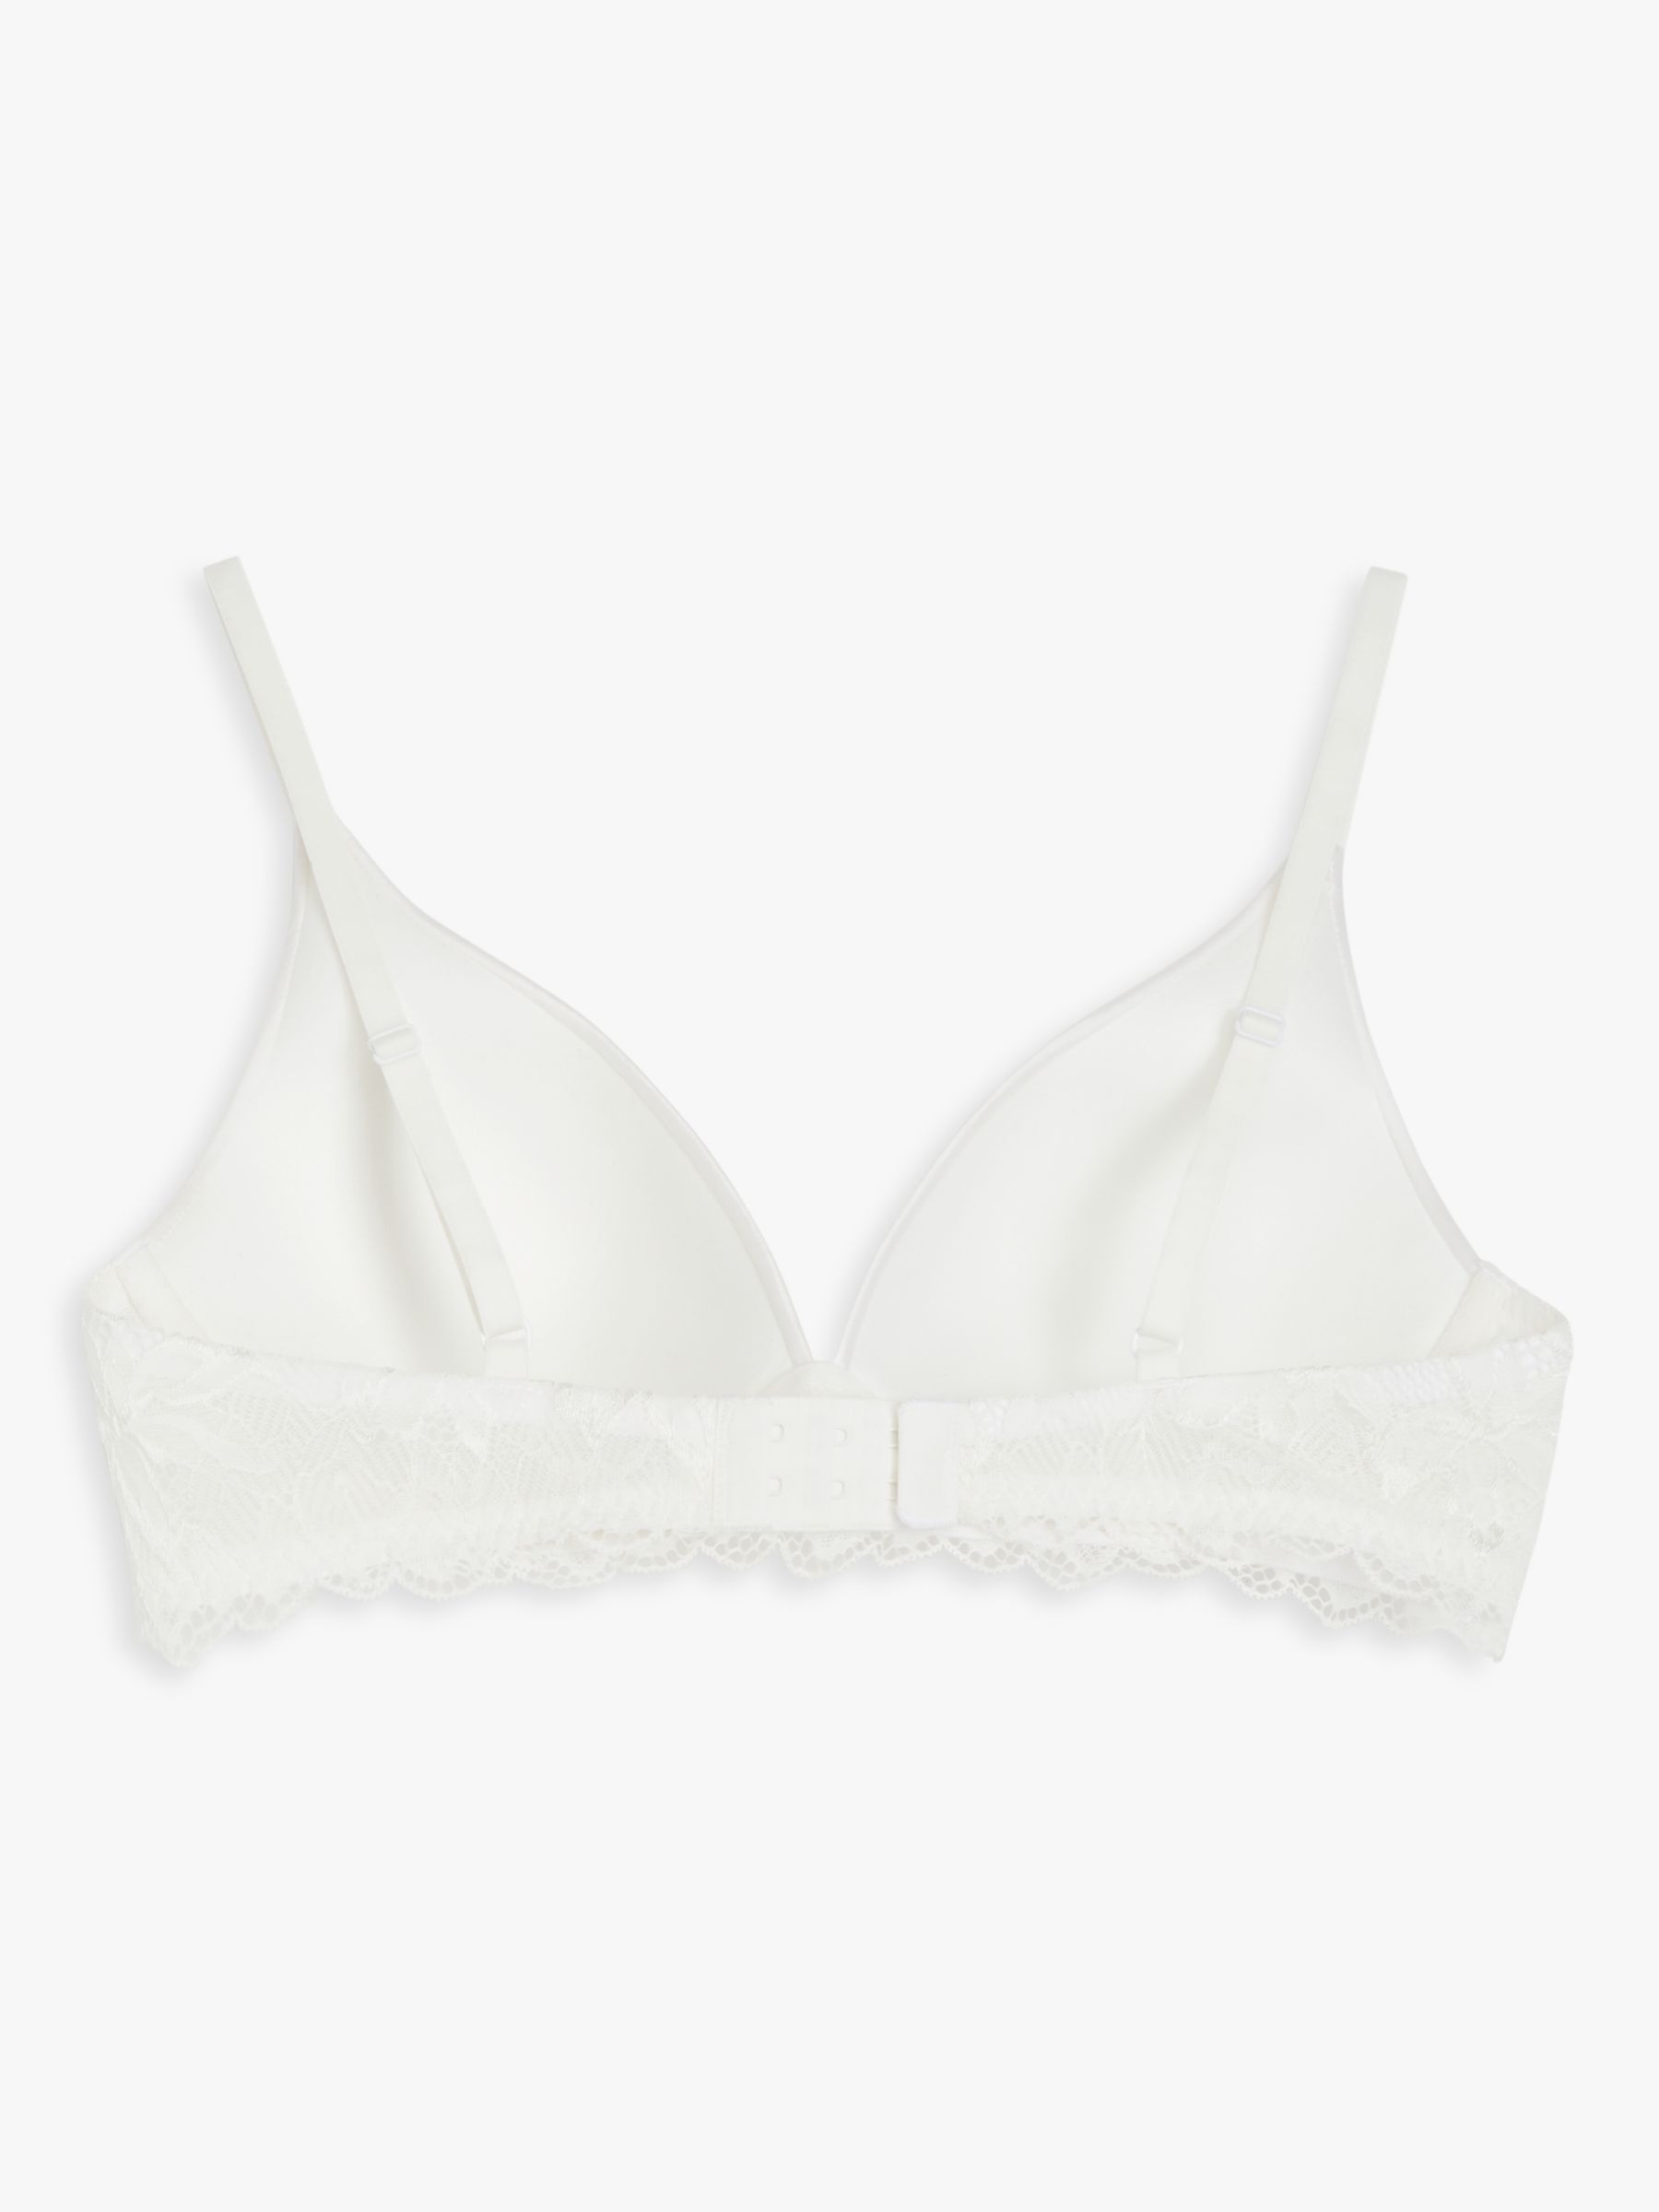 John Lewis ANYDAY Willow Lace Detail Non-Wired Bra, Ivory, 30B